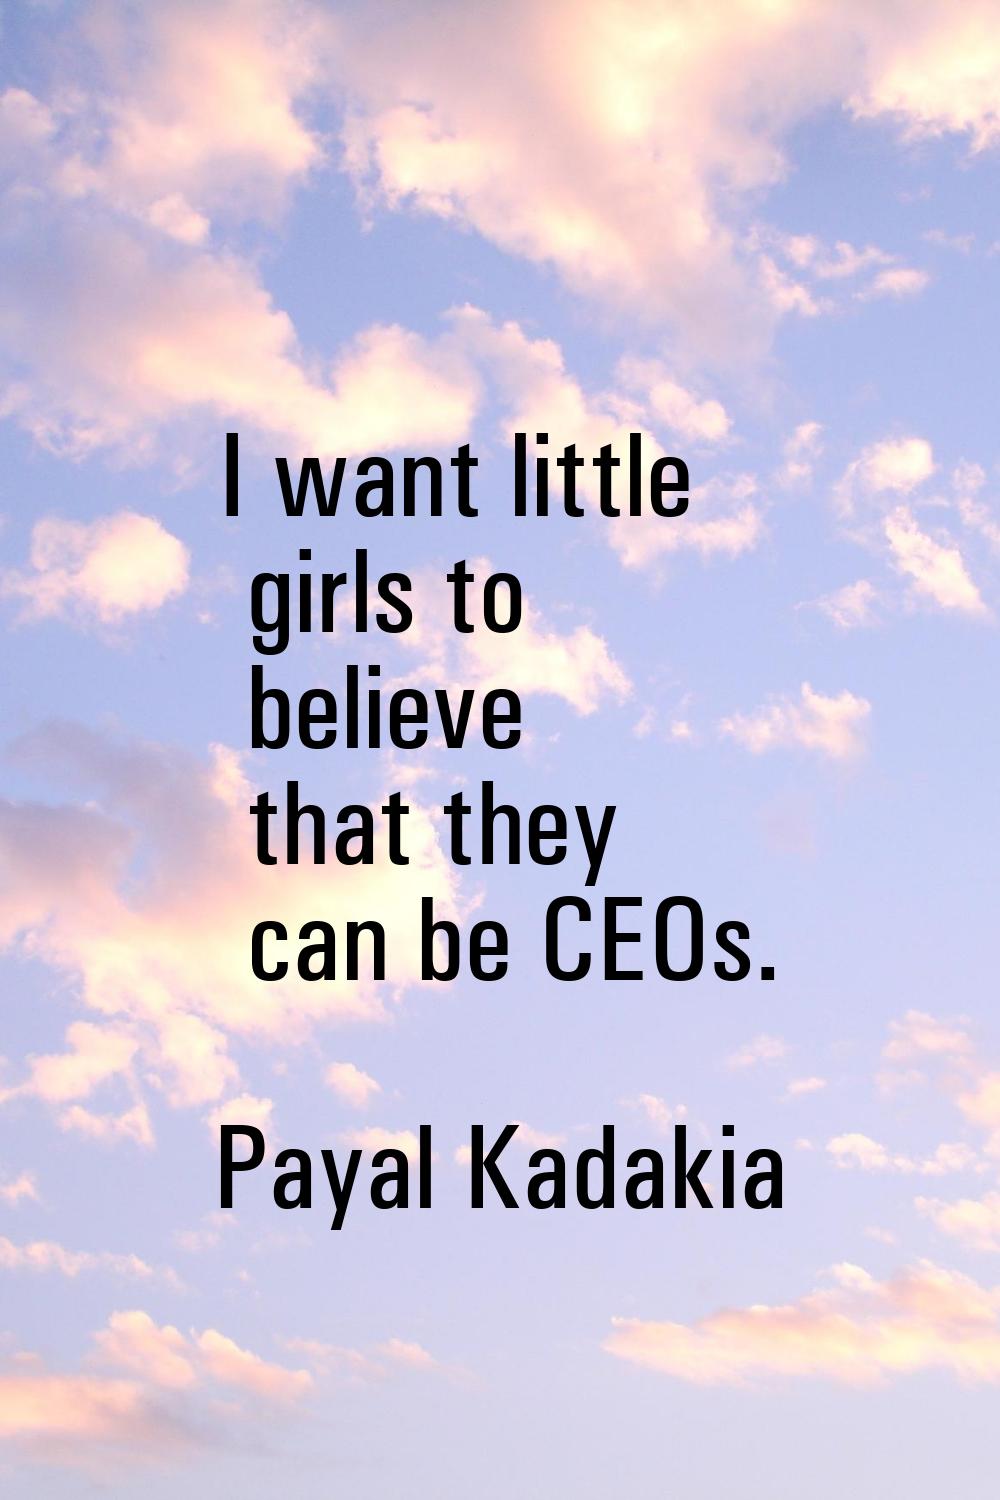 I want little girls to believe that they can be CEOs.